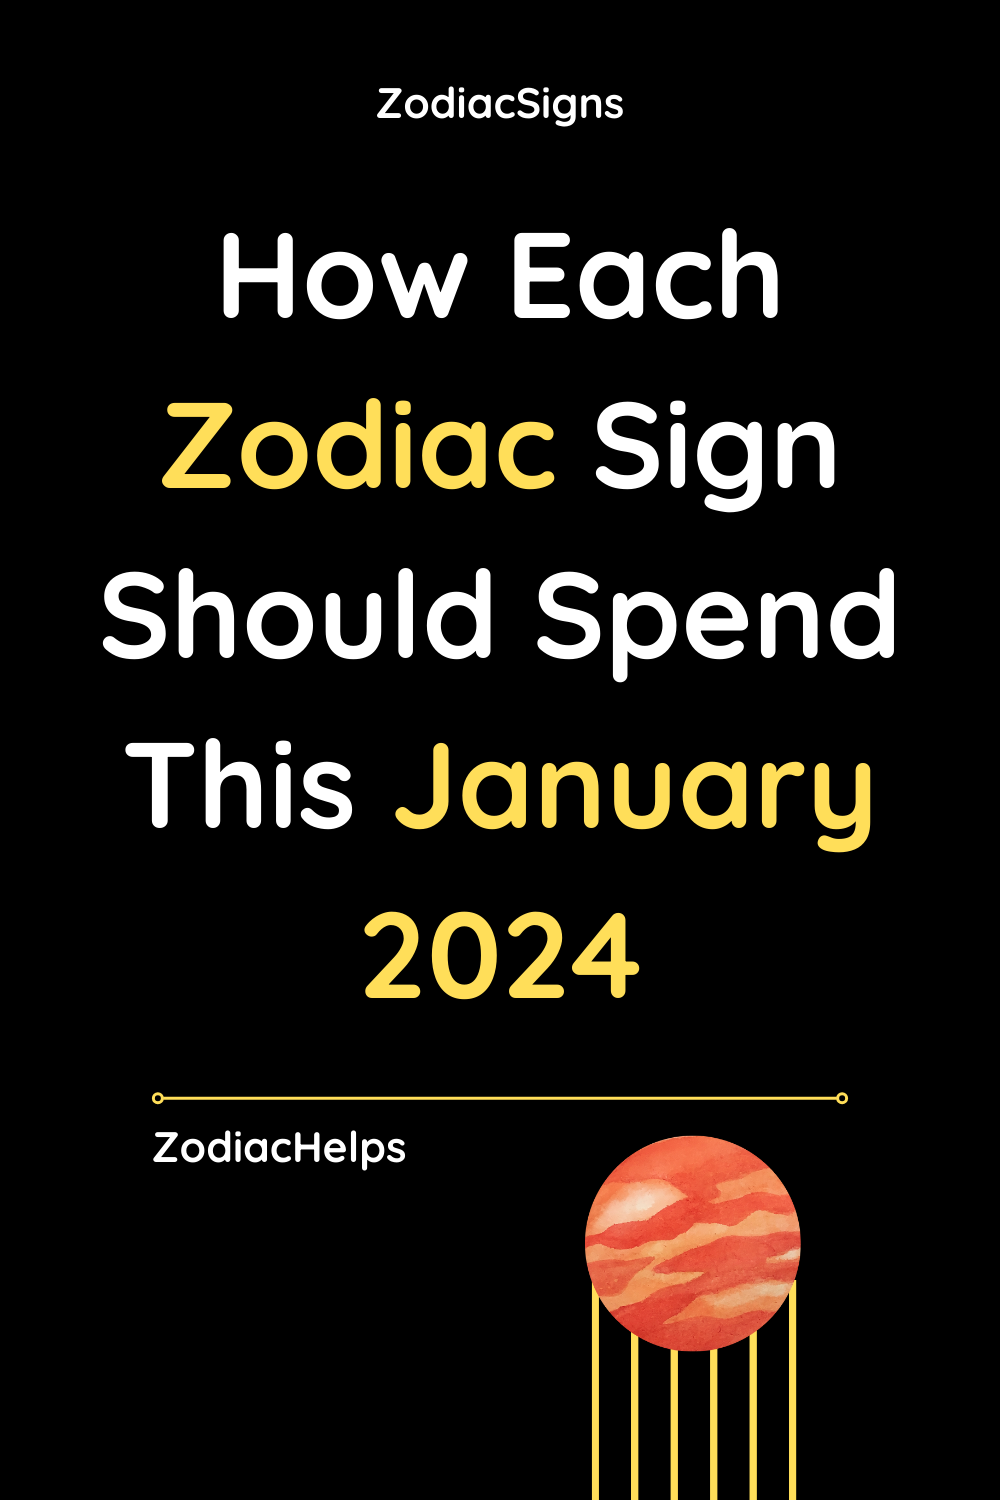 How Each Zodiac Sign Should Spend This January 2024